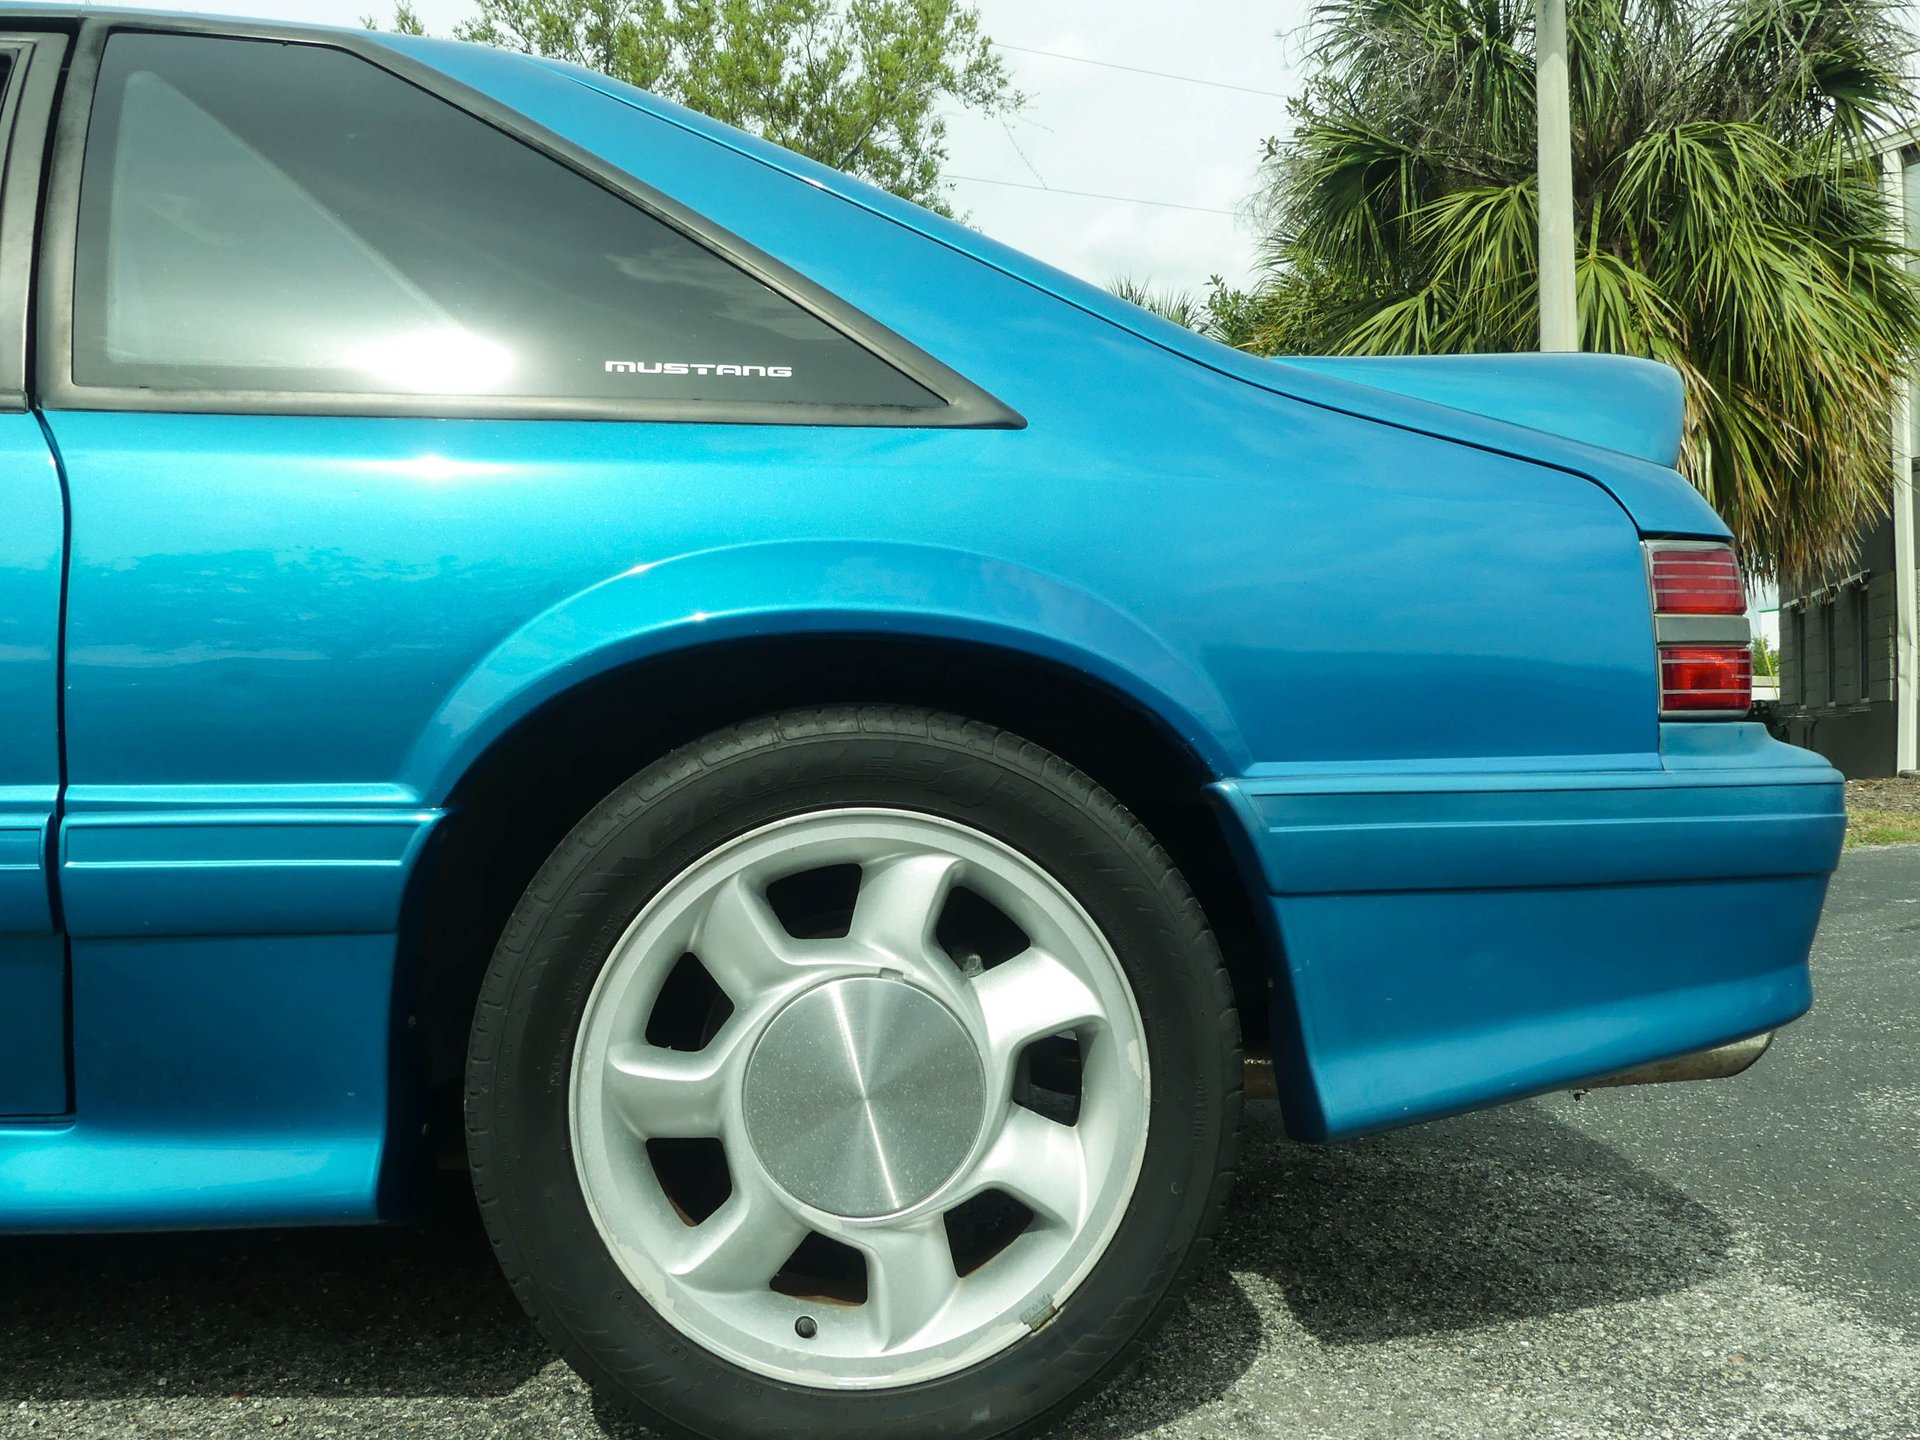 0799-TAMPA | 1993 Ford Mustang Cobra | Survivor Classic Cars Services